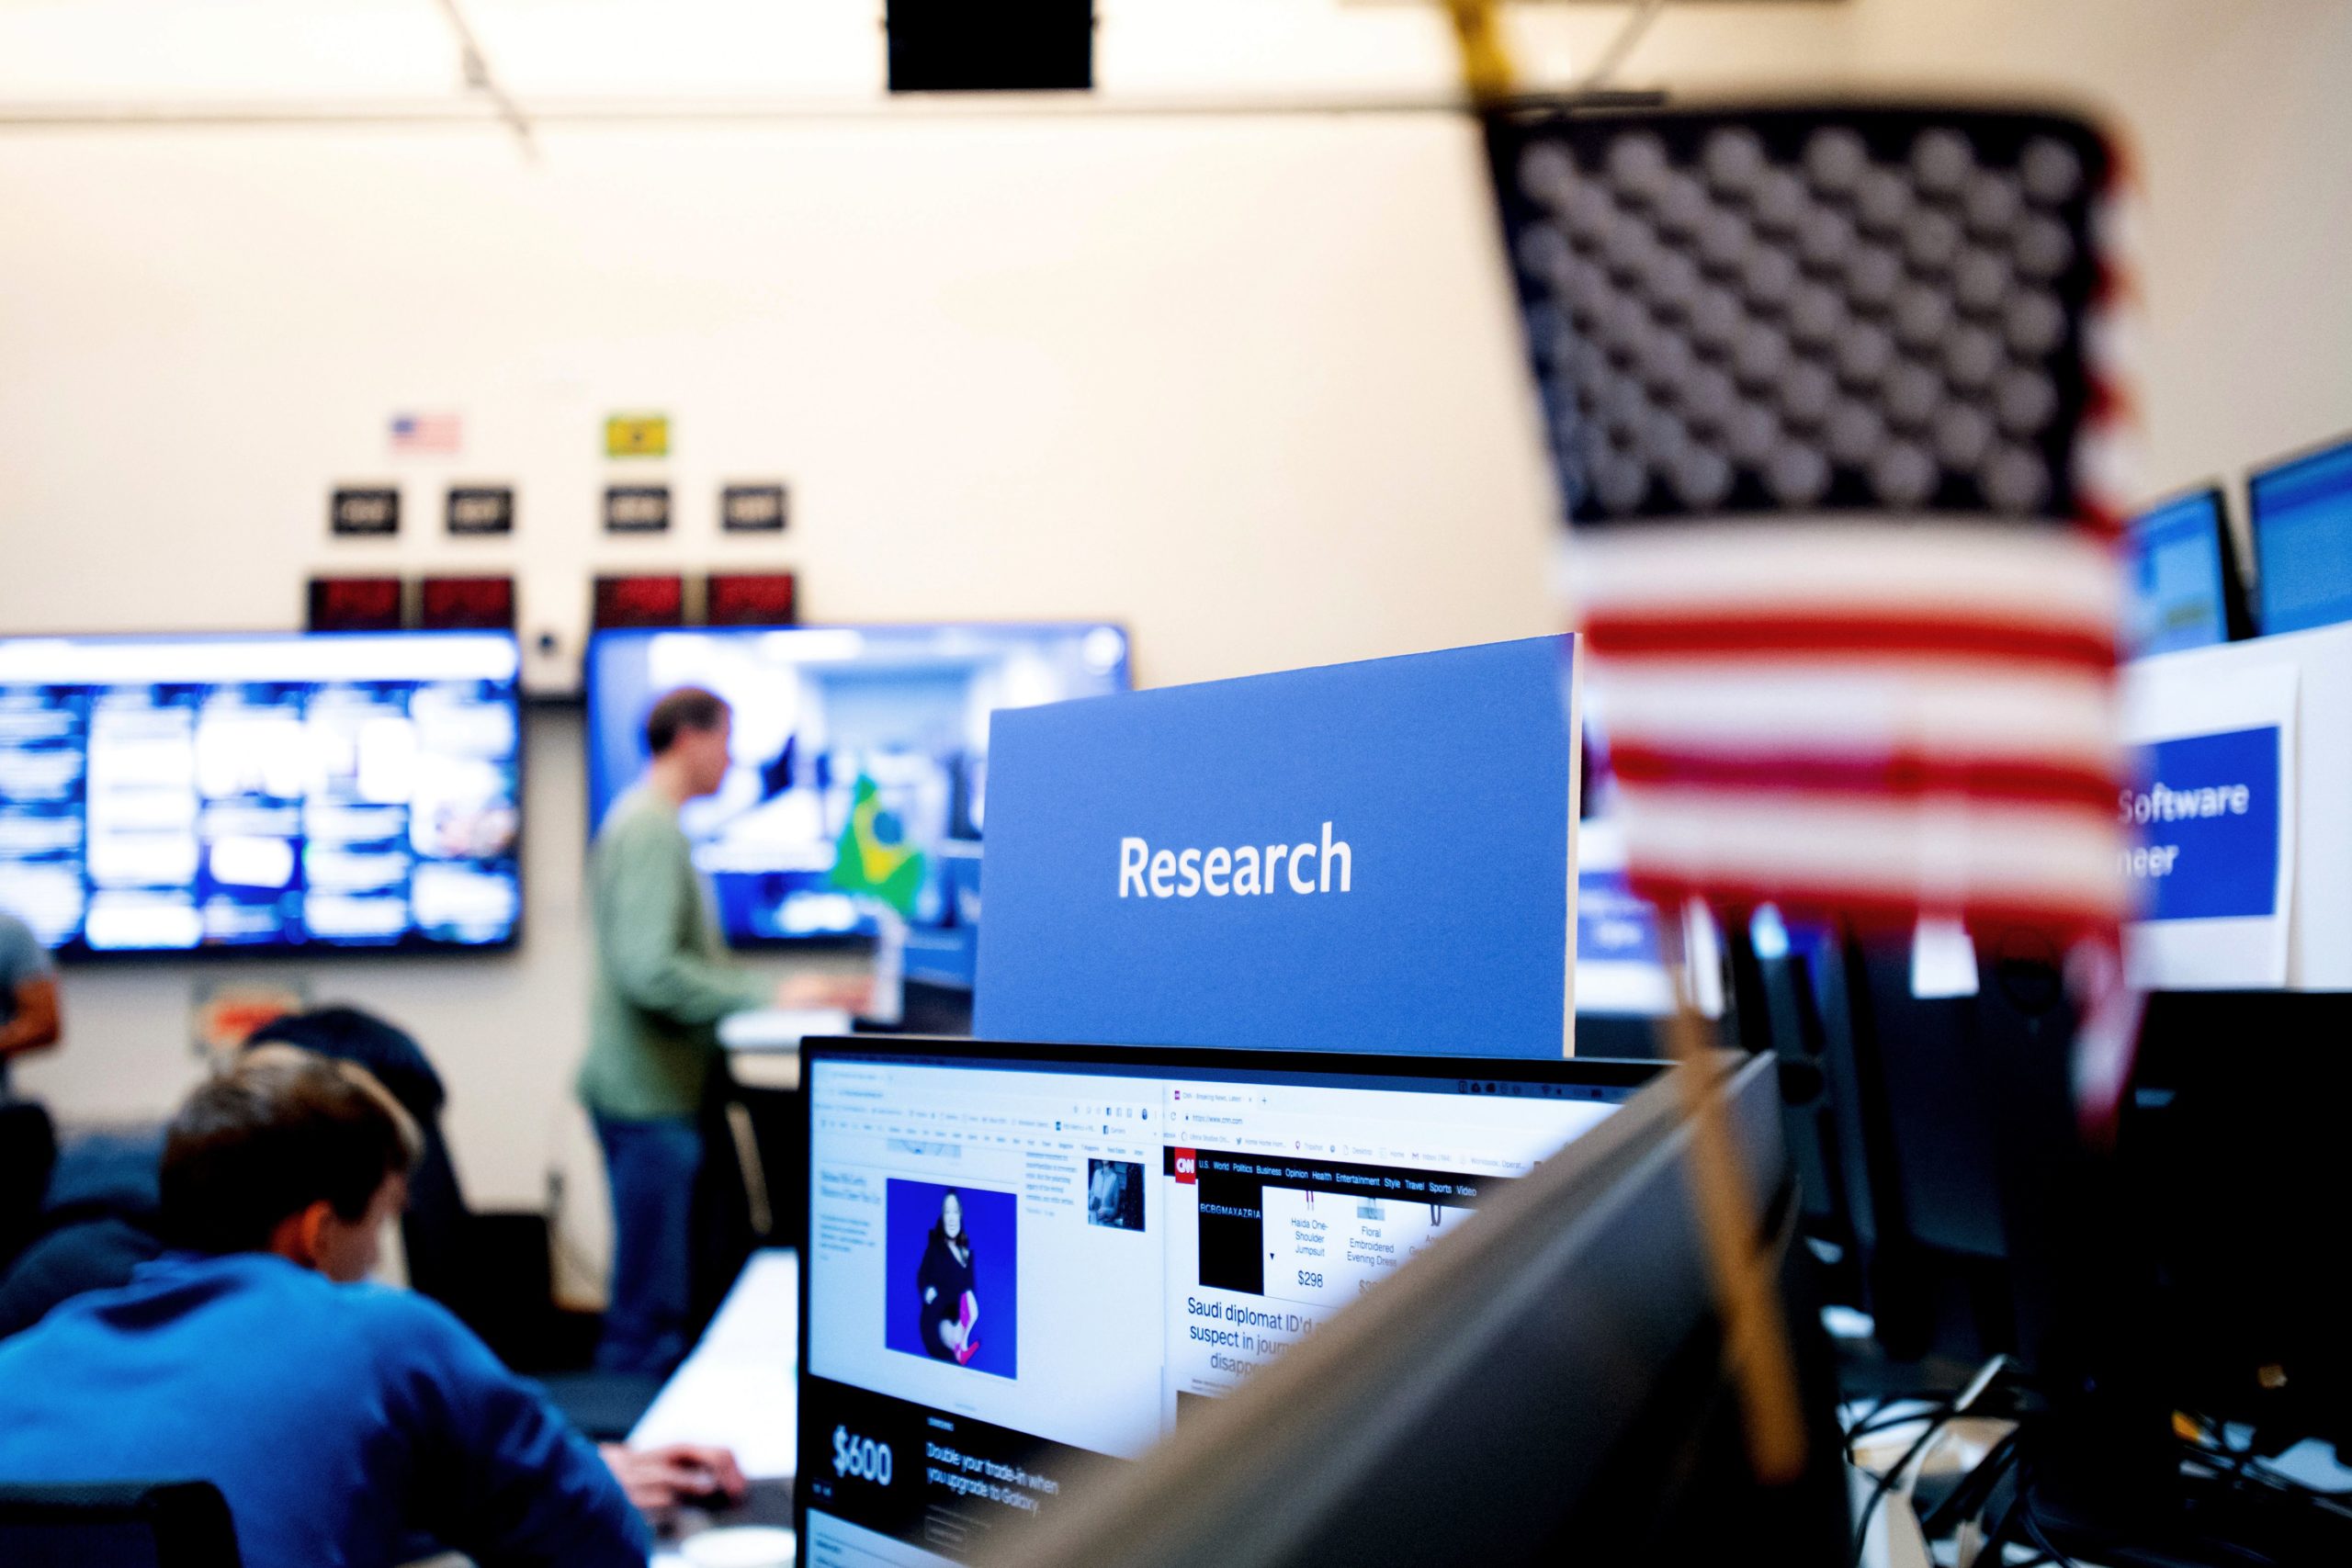 Employees work in Facebook's "War Room," during a media demonstration on October 17, 2018, in Menlo Park, California. - The freshly launched unit at Facebook's Menlo Park headquarters is the nerve center for the fight against misinformation and manipulation of the largest social network by foreign actors trying to influence elections in the United States and elsewhere. The war room, which will ramp up activity for the November 6 midterm US elections, is the most concrete sign of Facebook's efforts to weed out misinformation. (Photo by NOAH BERGER / AFP) (Photo by NOAH BERGER/AFP via Getty Images)